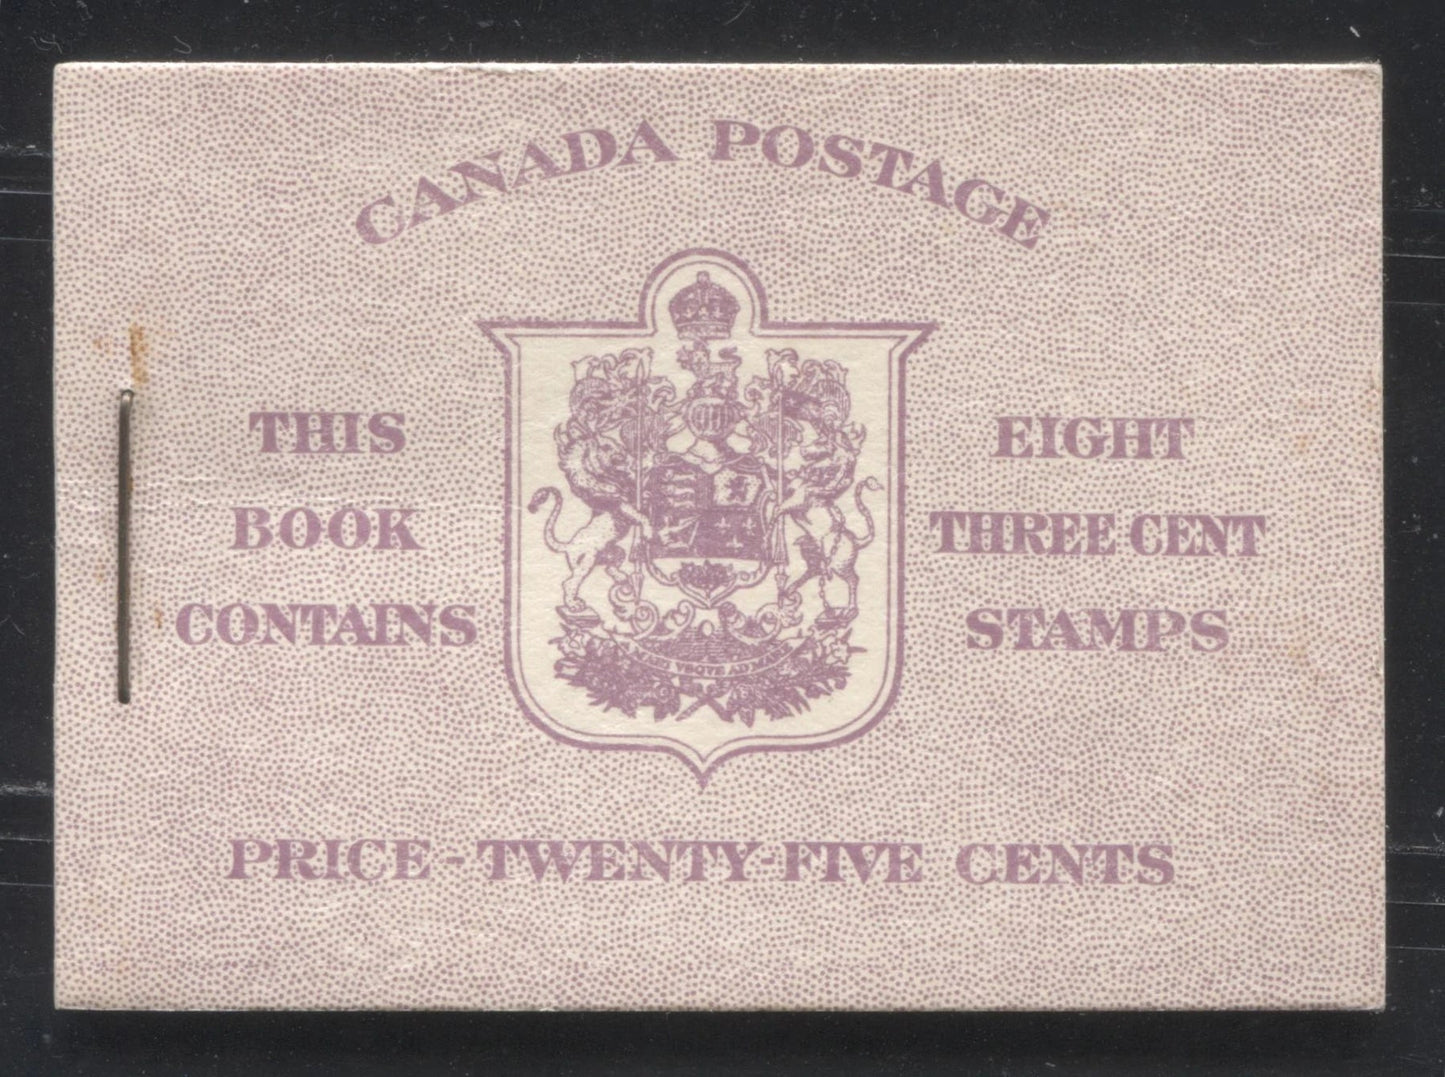 Lot 300 Canada #BK40a 1949-1953 Postes-Postage Issue A Complete 25c English Booklet Containing 2 Panes of the 3c Rose-Purple King George VI, Harris Front Cover Type IIe, Back Cover Cai, 7c & 5c Rate Page